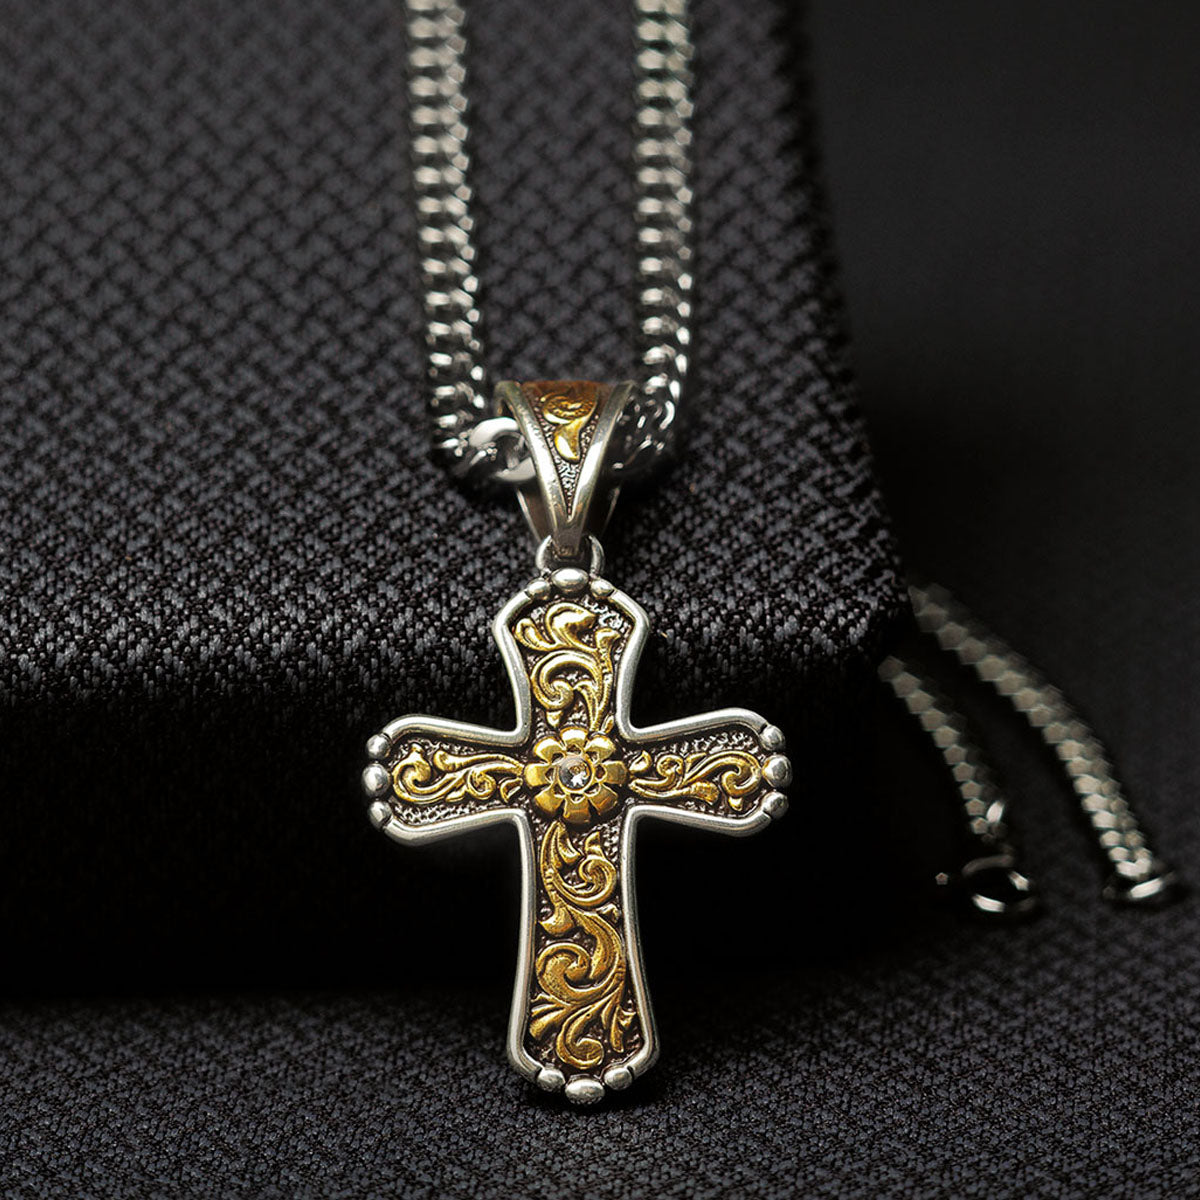 Twister Men's Floral Scroll Cross Necklace - Gold